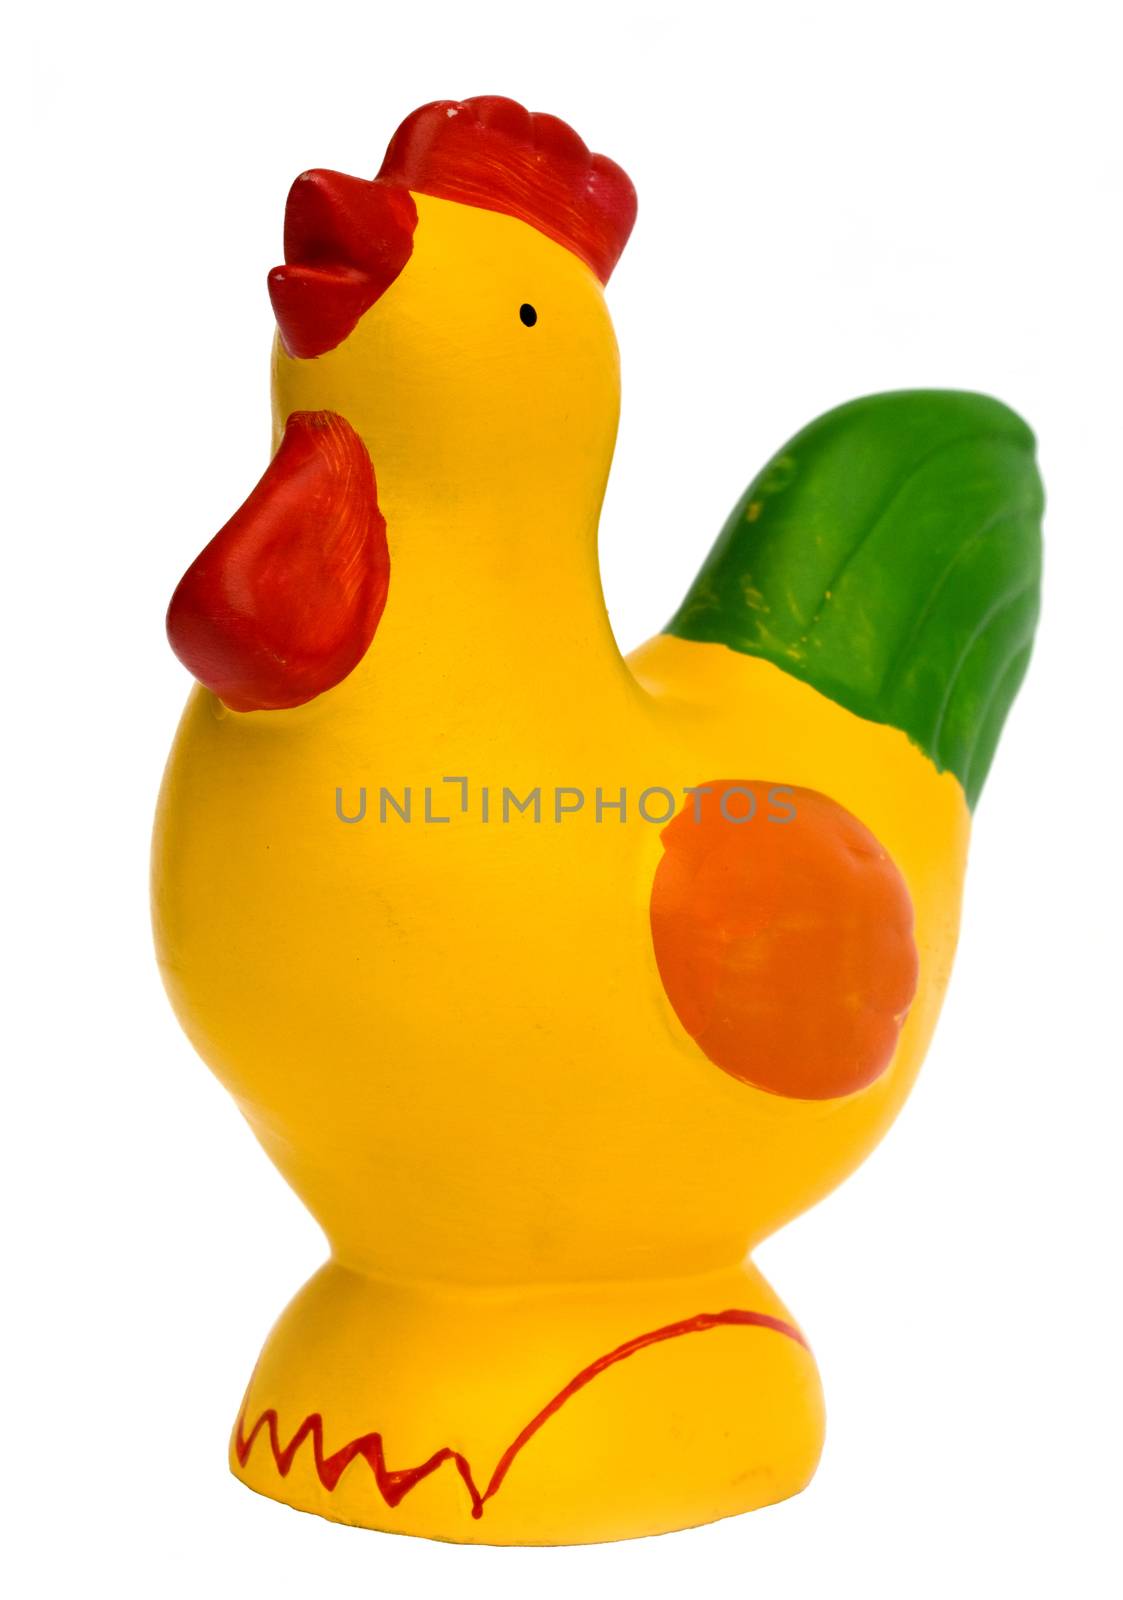 Old retro yellow ceramic chicken isolated on white